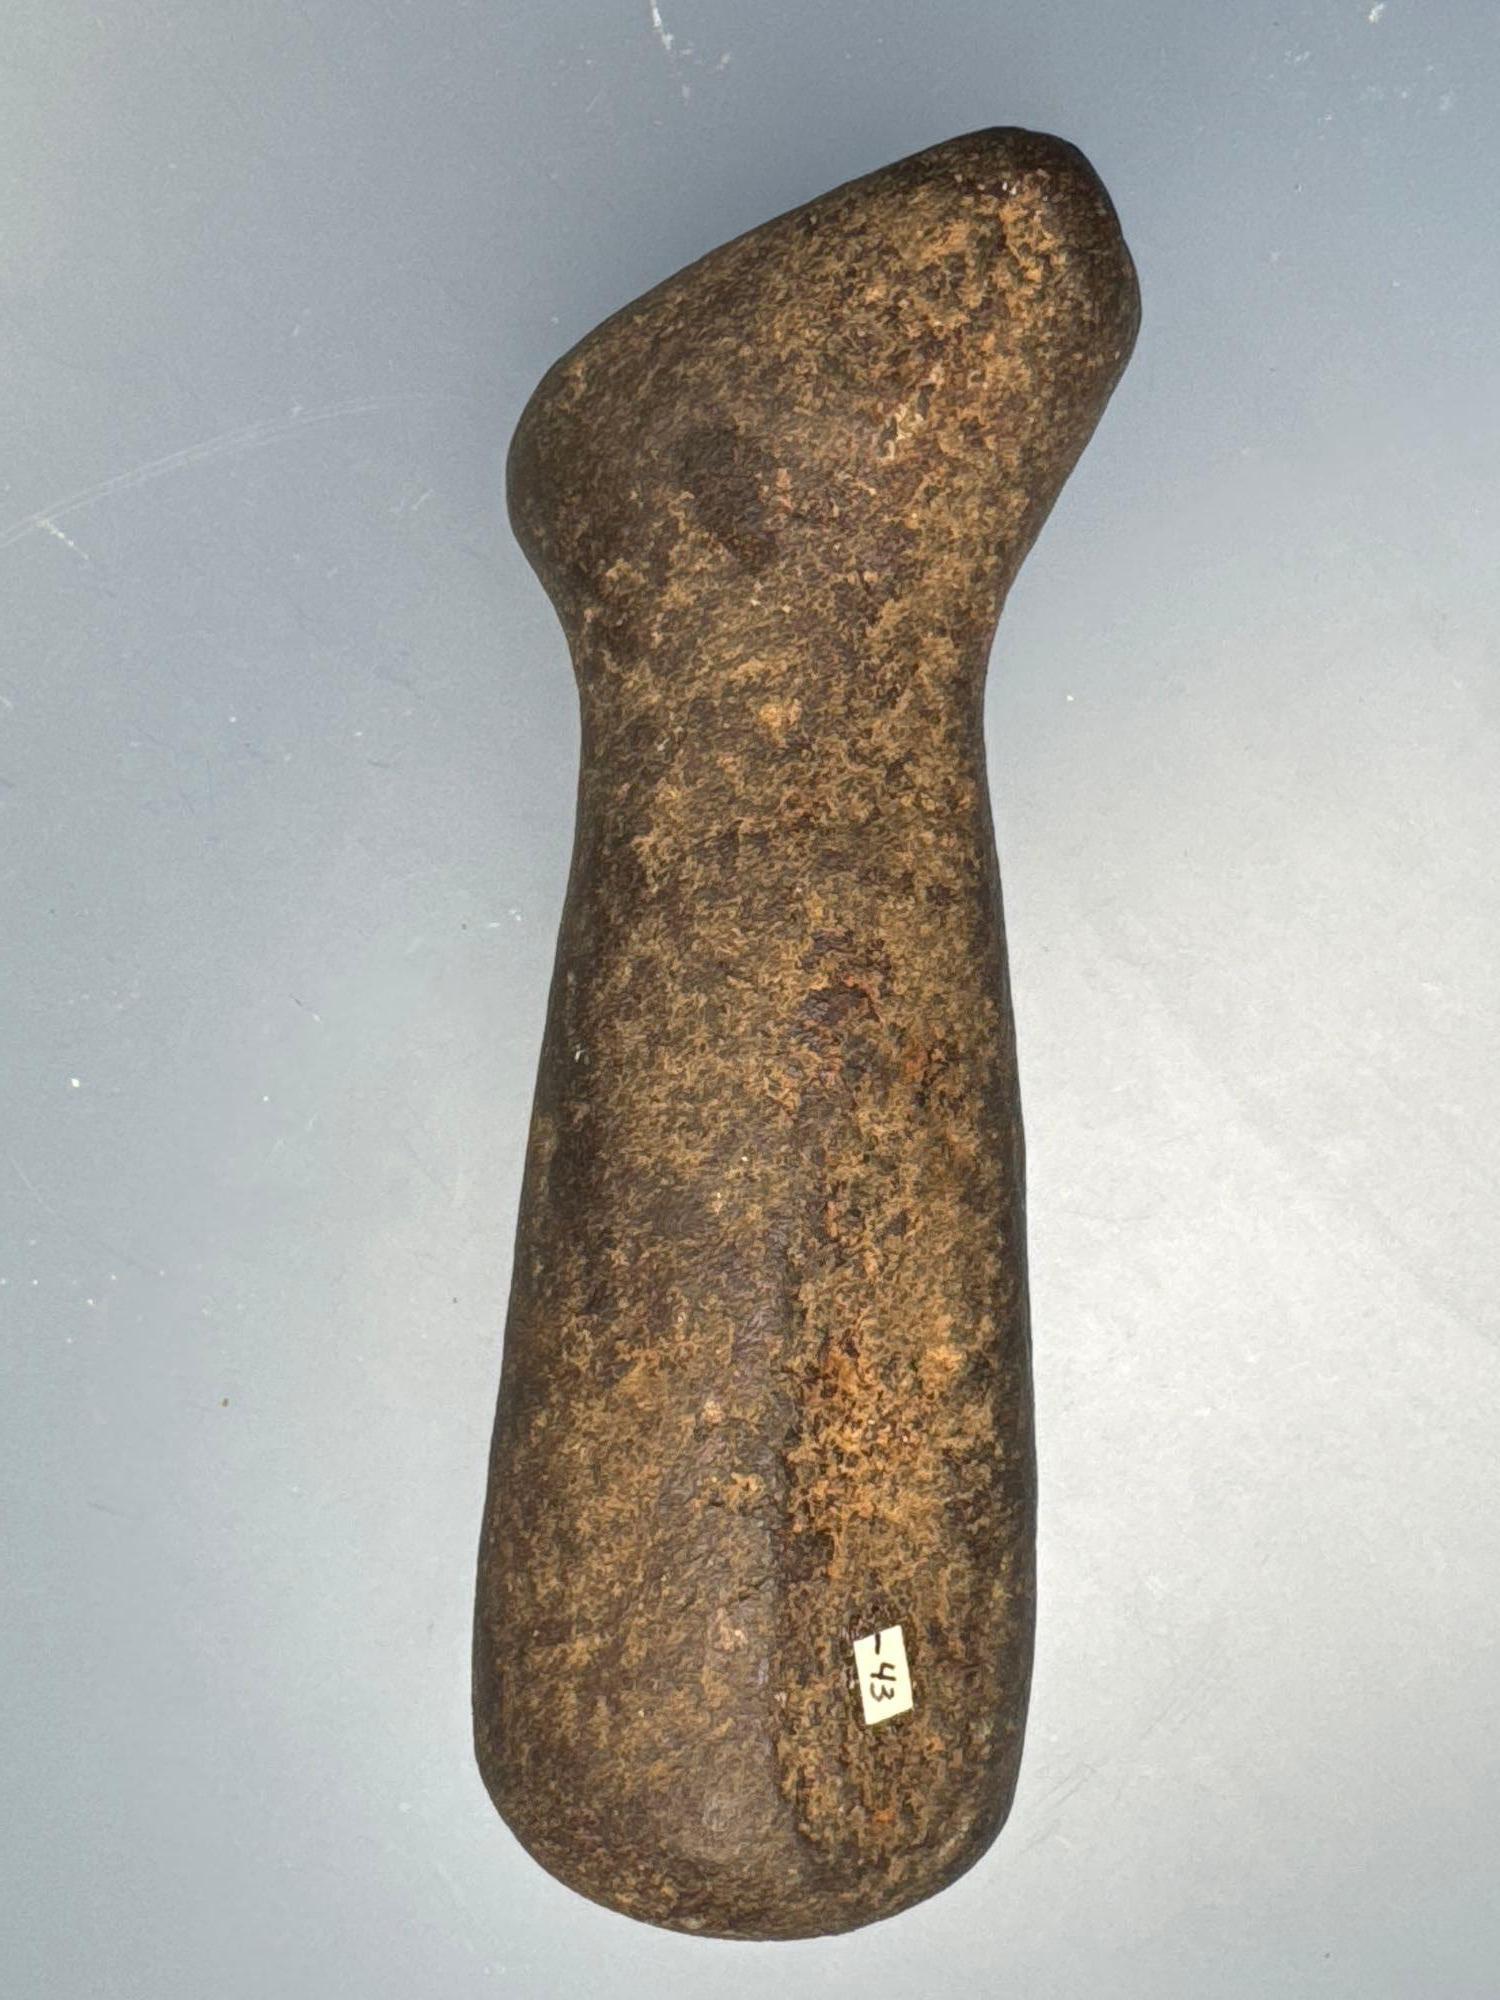 Exceedingly Rare Bear Effigy Pestle, Found in New York, Ex: Raysender Collection, Well-Made, Measure